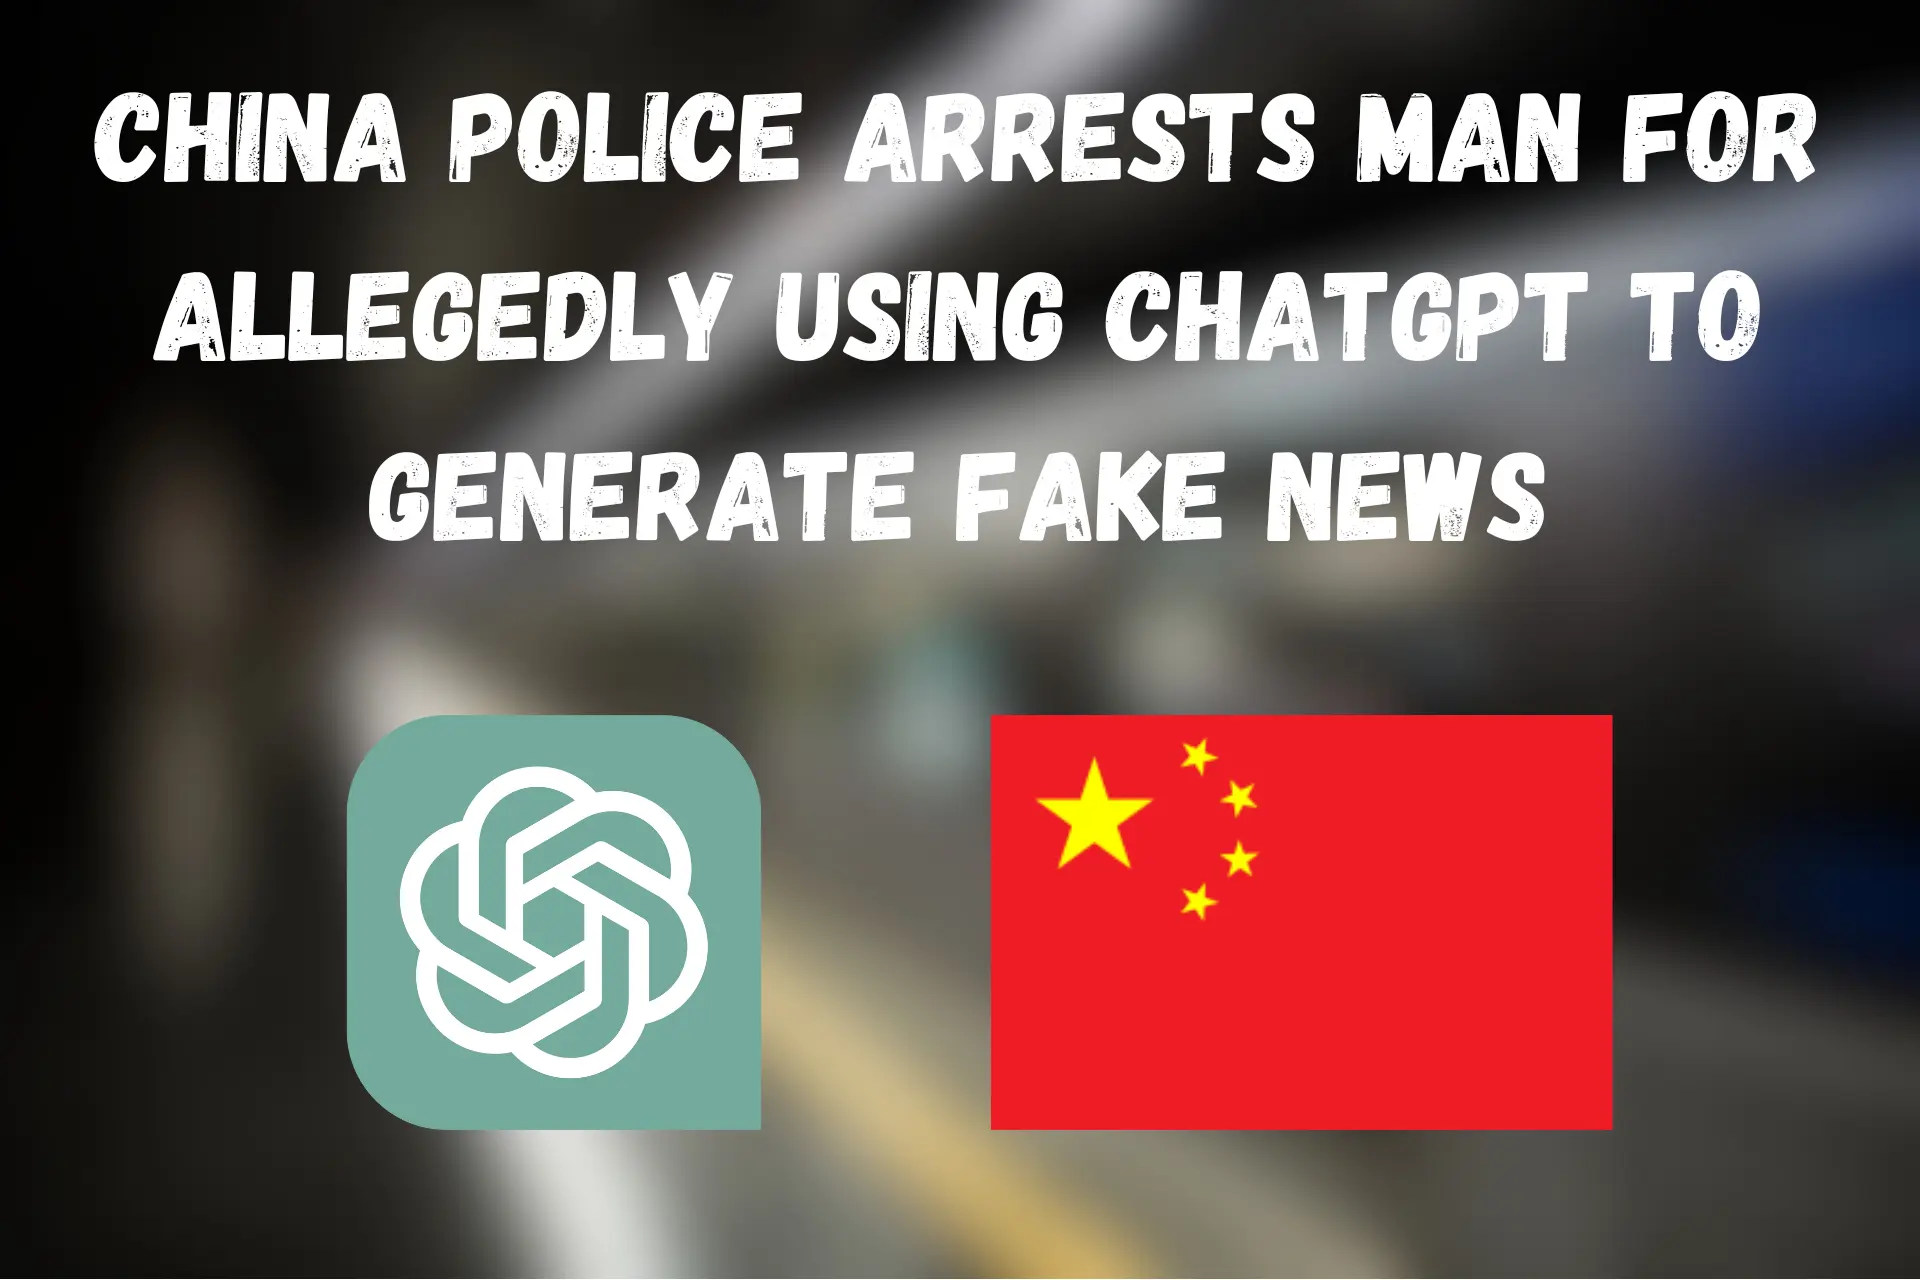 China Police Arrests Man for Allegedly Using ChatGPT to Generate Fake News